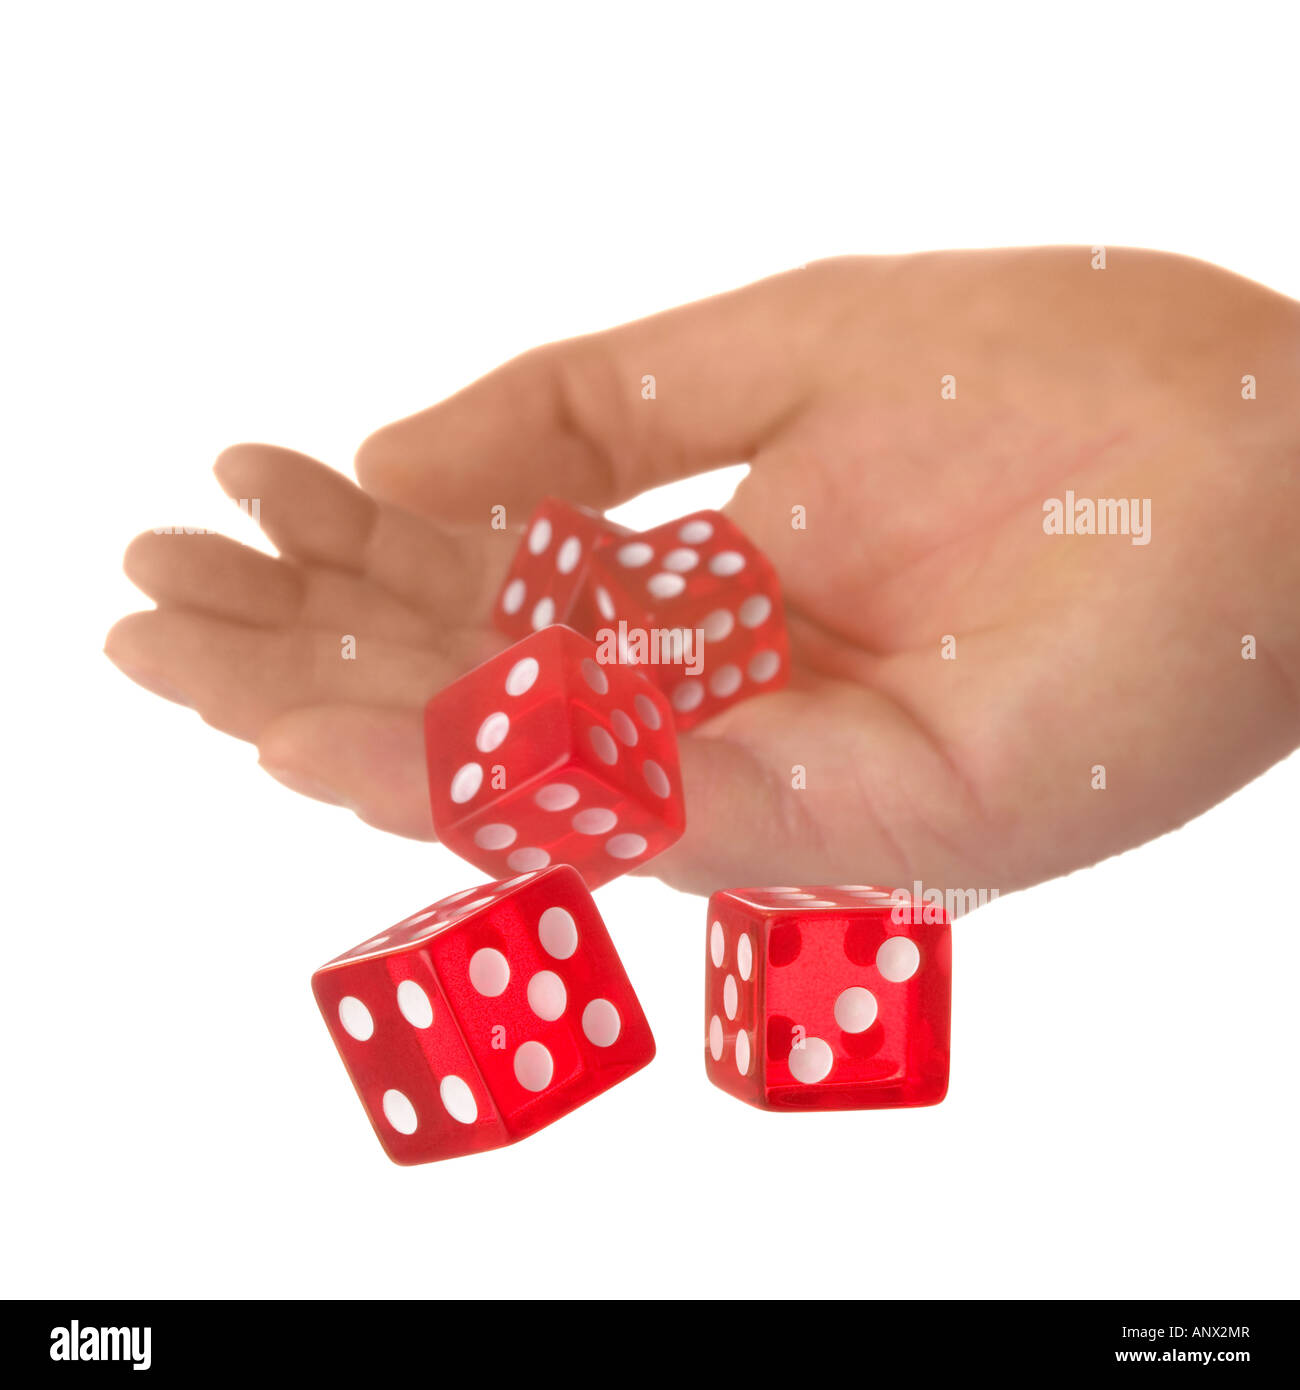 Five red dice being thrown from a hand shallow DOF Stock Photo